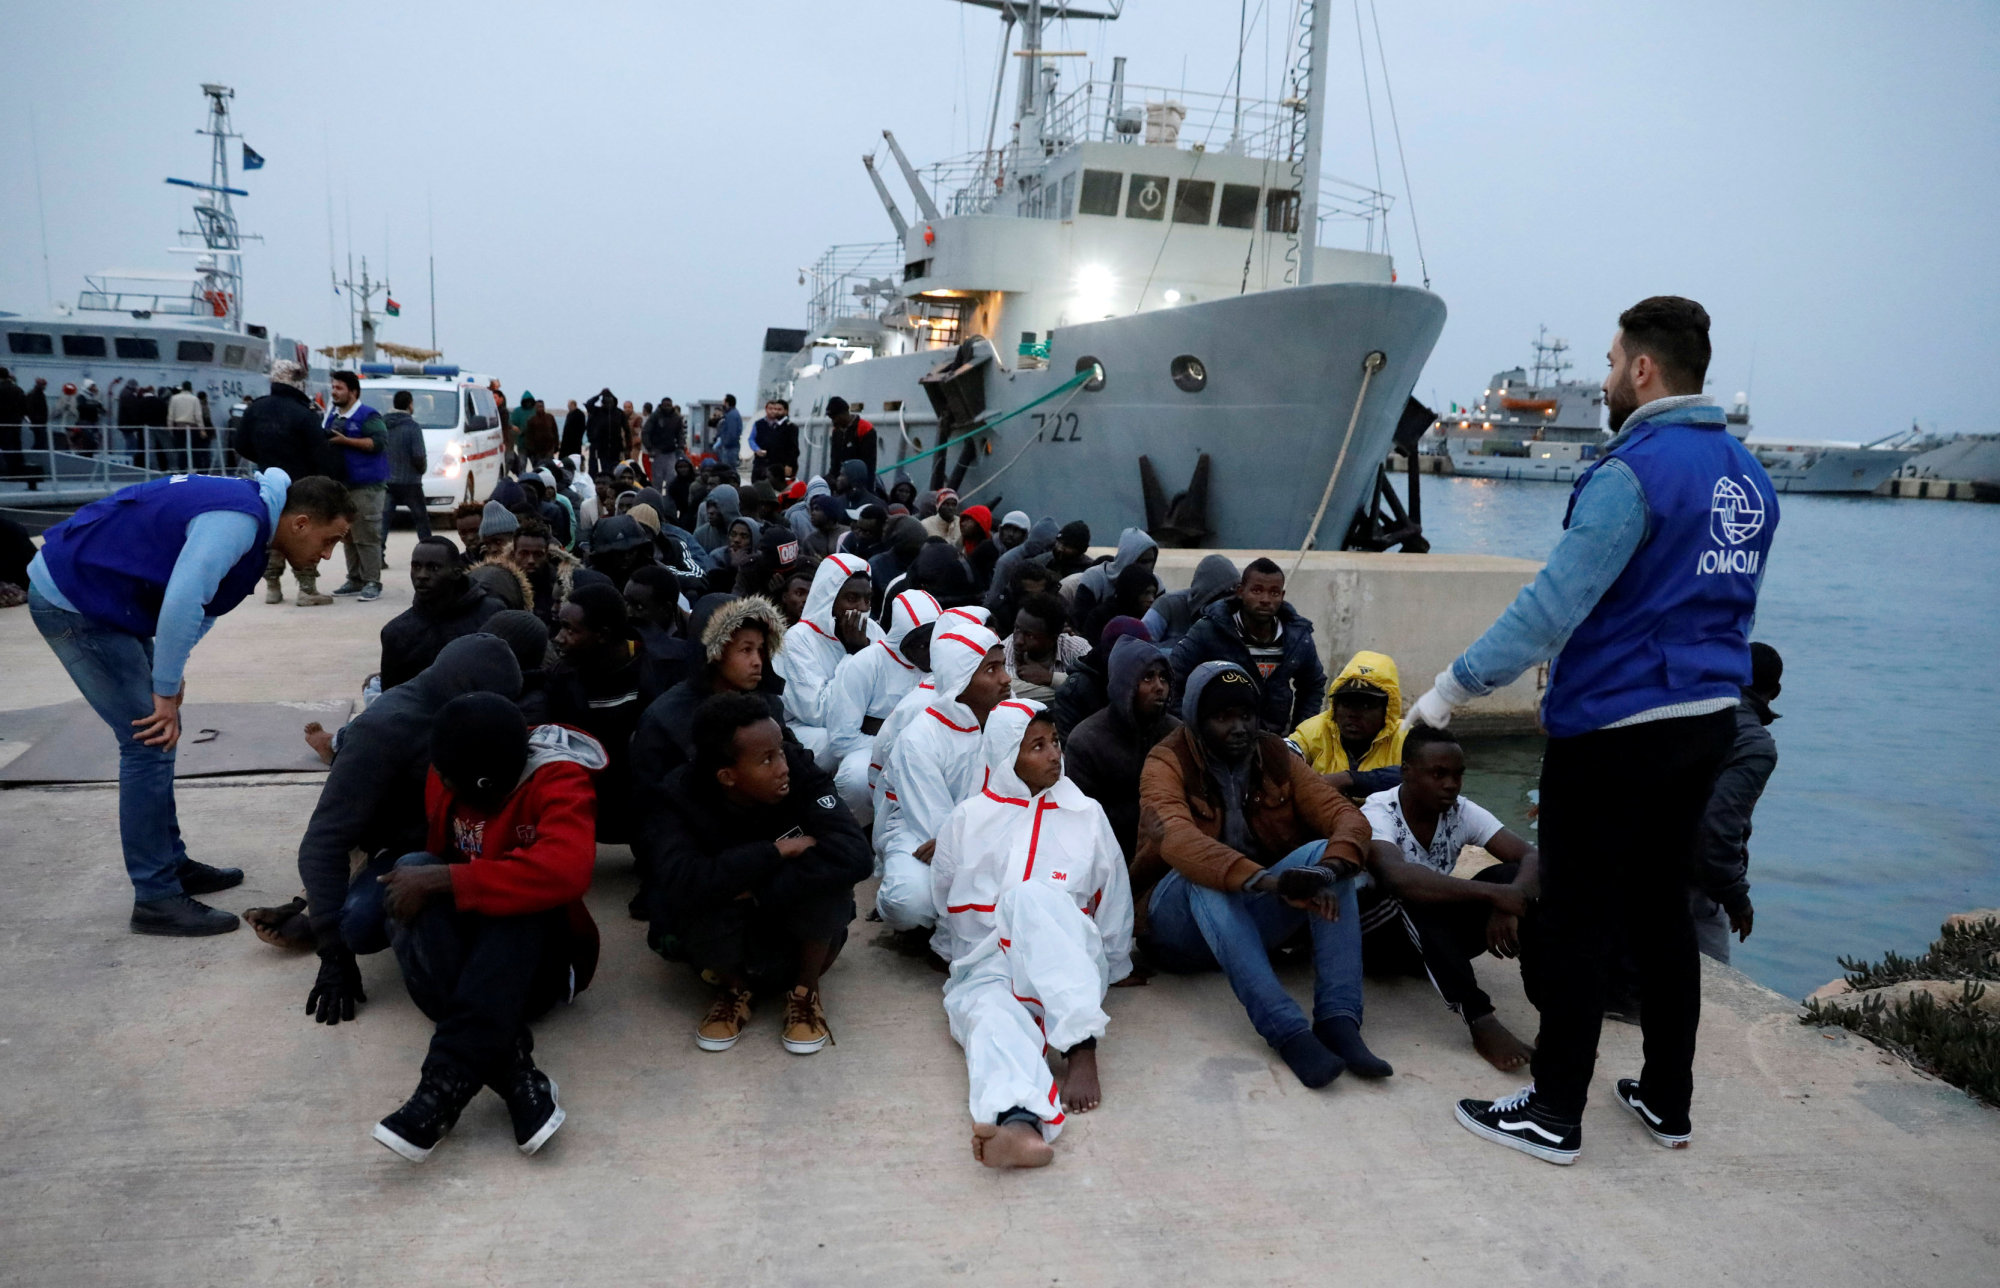 Migrants sit at a naval base after they were rescued by Libyan coast guard boats, in Tripoli Tuesday. | REUTERS